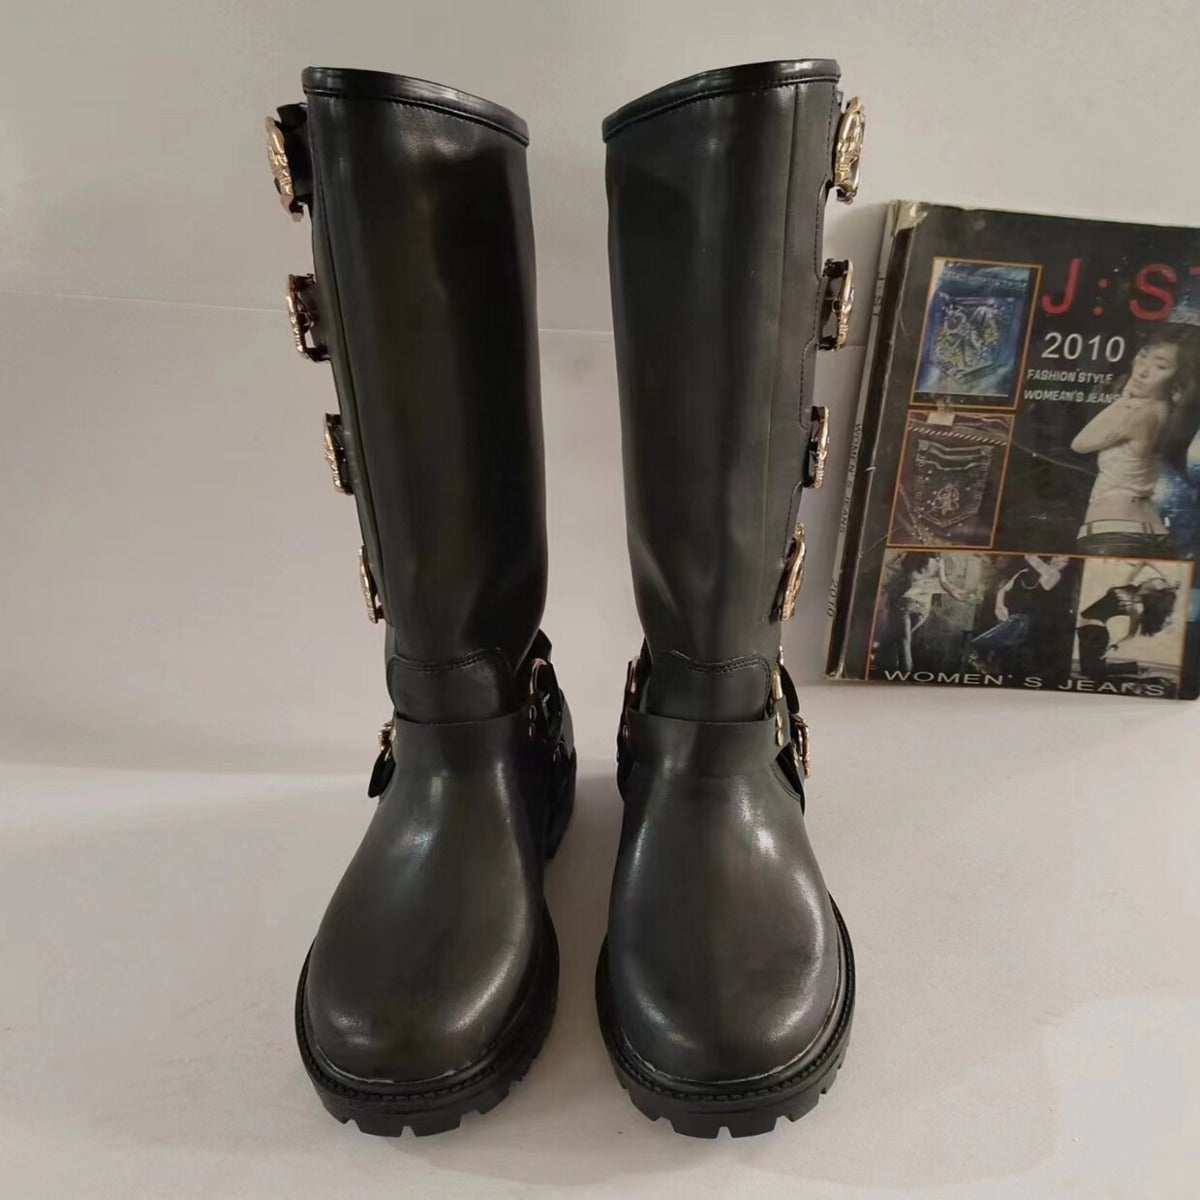 Men's Calf High Motorcycle Riding Boots with Skull Buckles